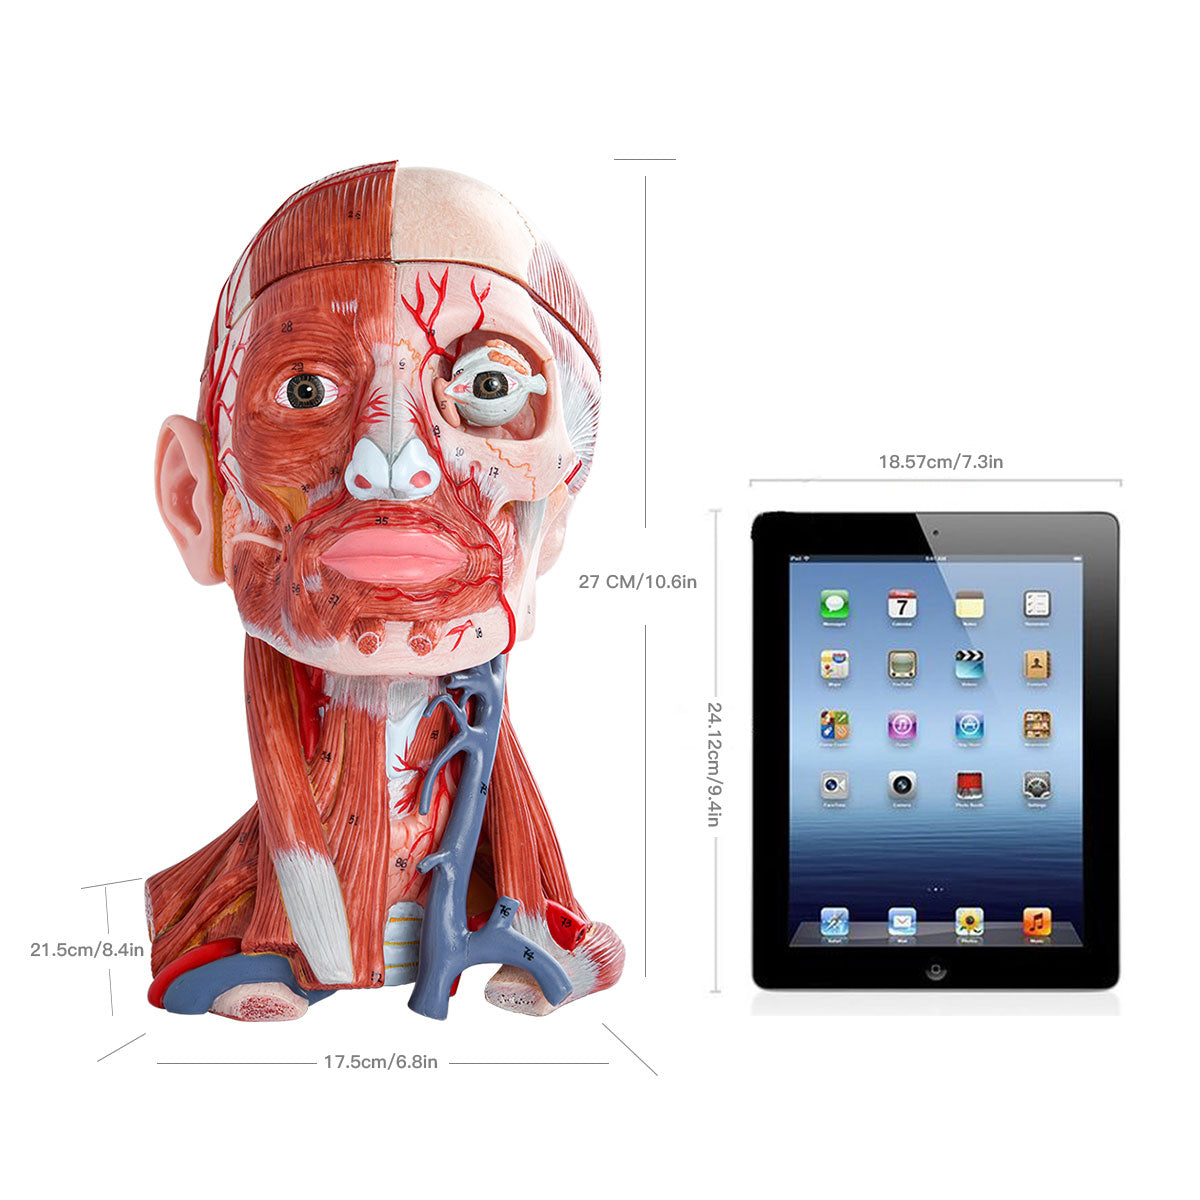 Evotech Scientific Head and Neck Musculature Including Brain and Vessels, 10 Parts, Life Size